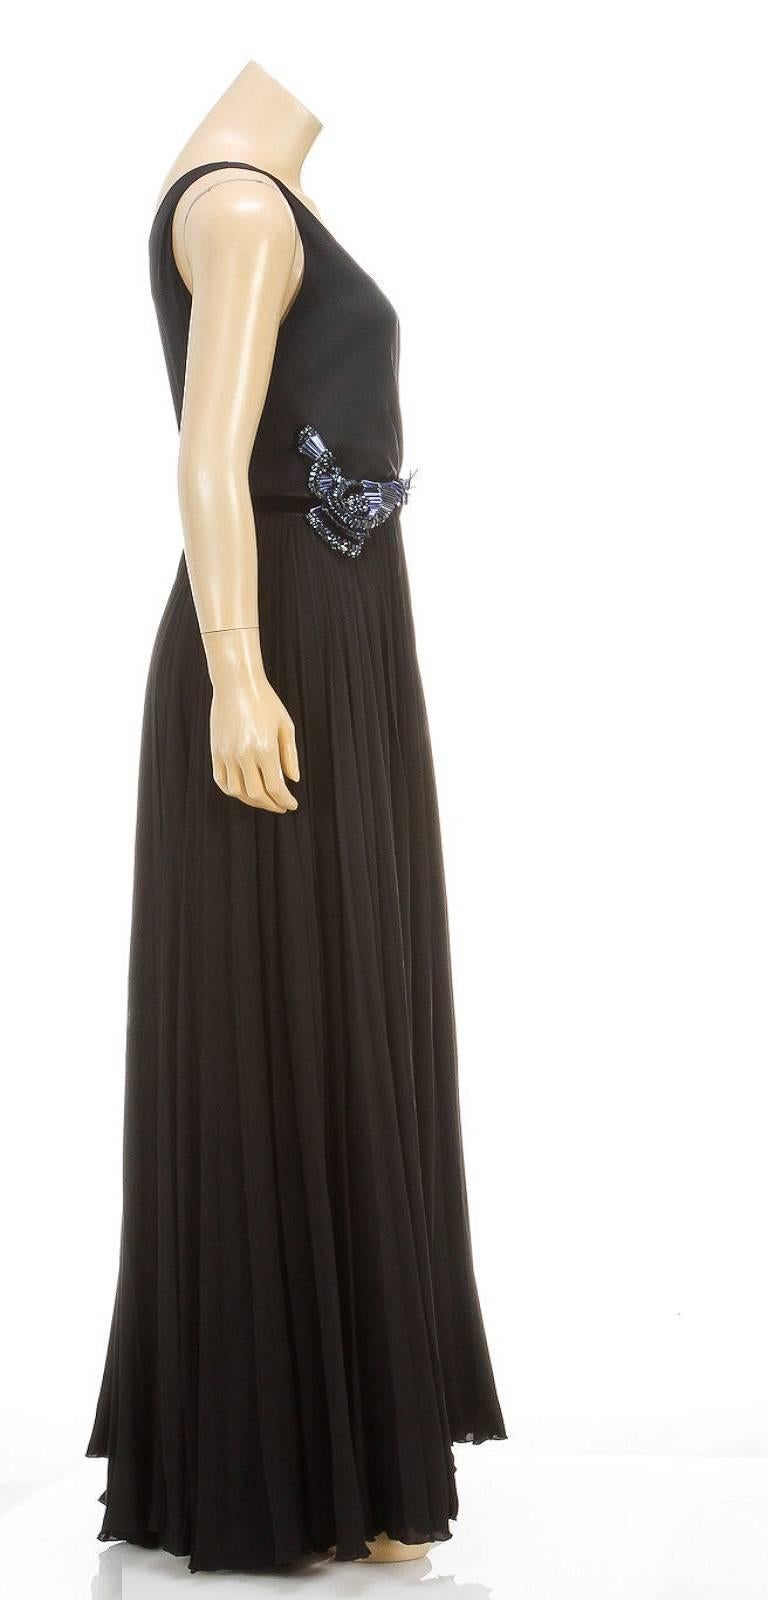 Gucci Black Sleeveless Butterfly Embellished Empire Waist Gown (Size 40) In Good Condition For Sale In Corona Del Mar, CA